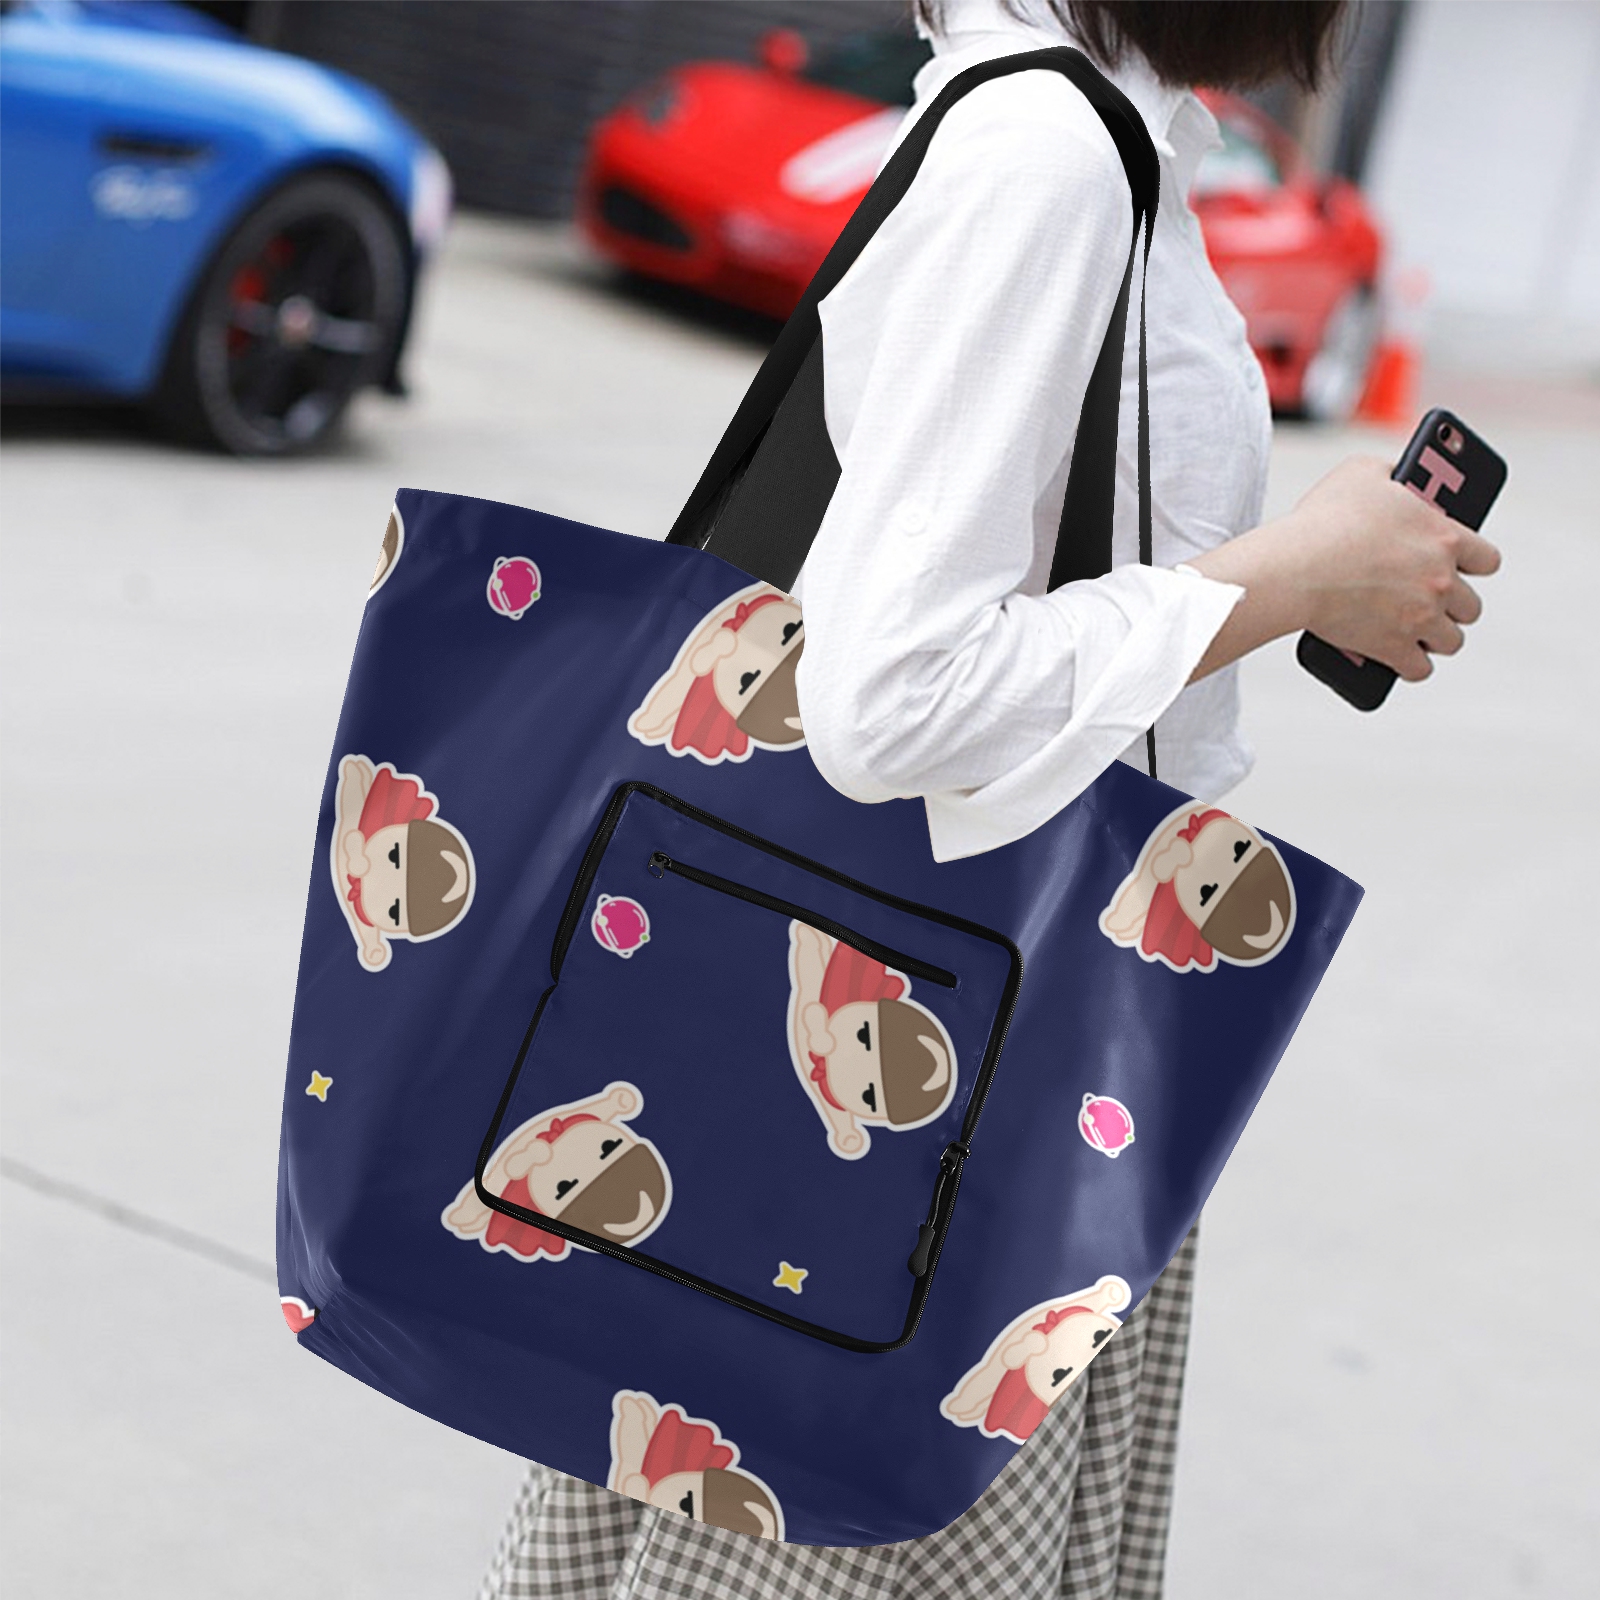 Foldable tote bag for shopping